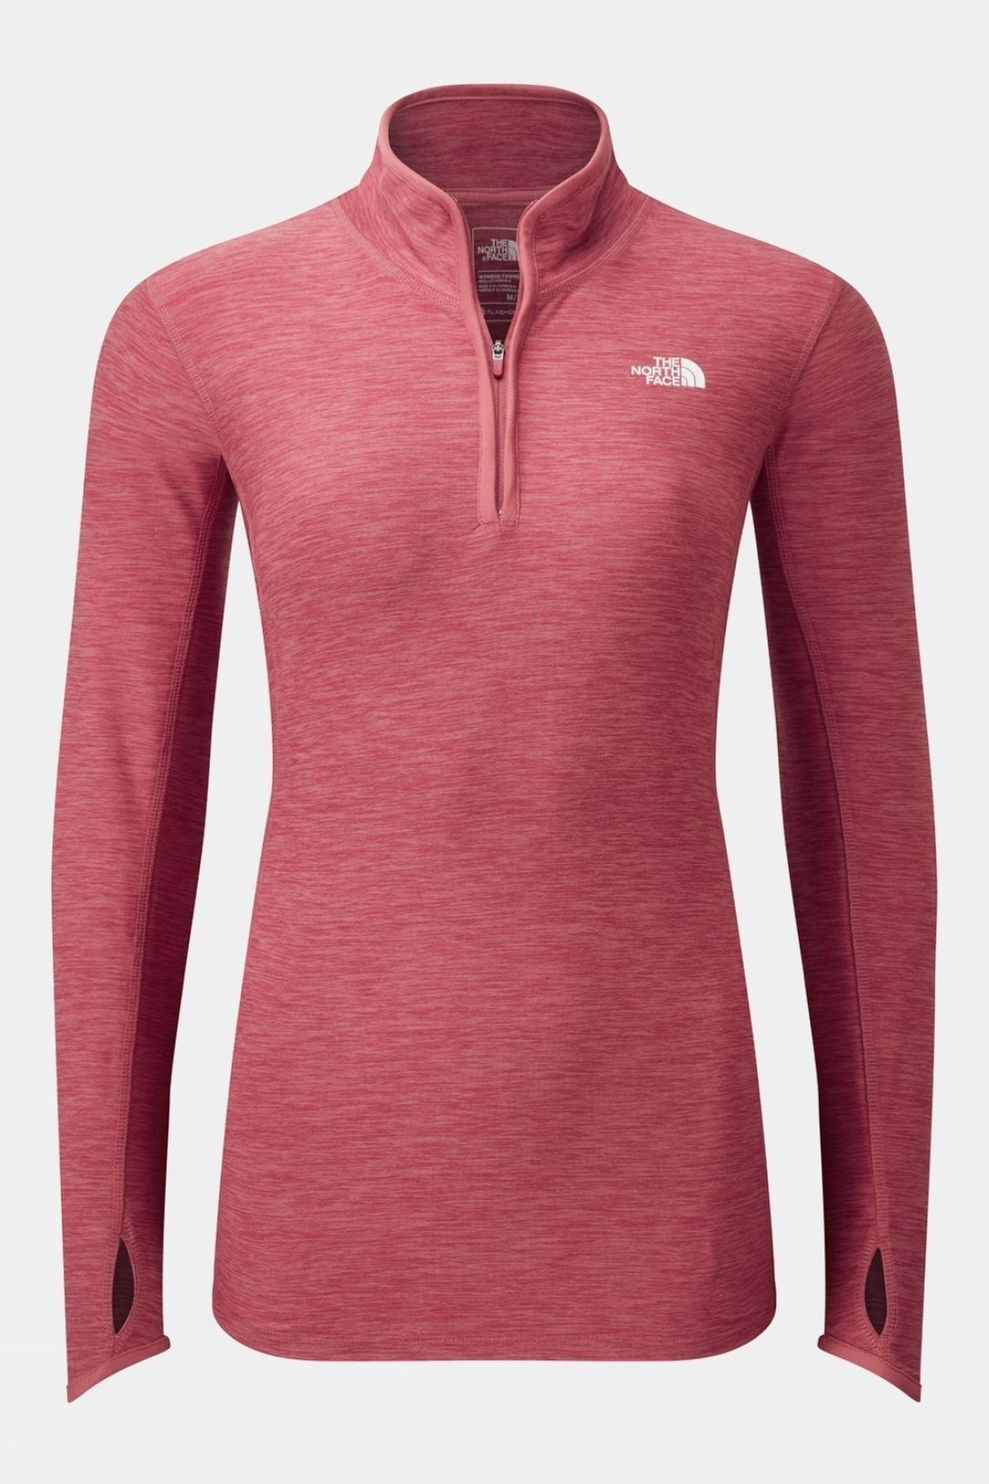 The North Face Womens Motivation Quarter Zip Top The North Face logo